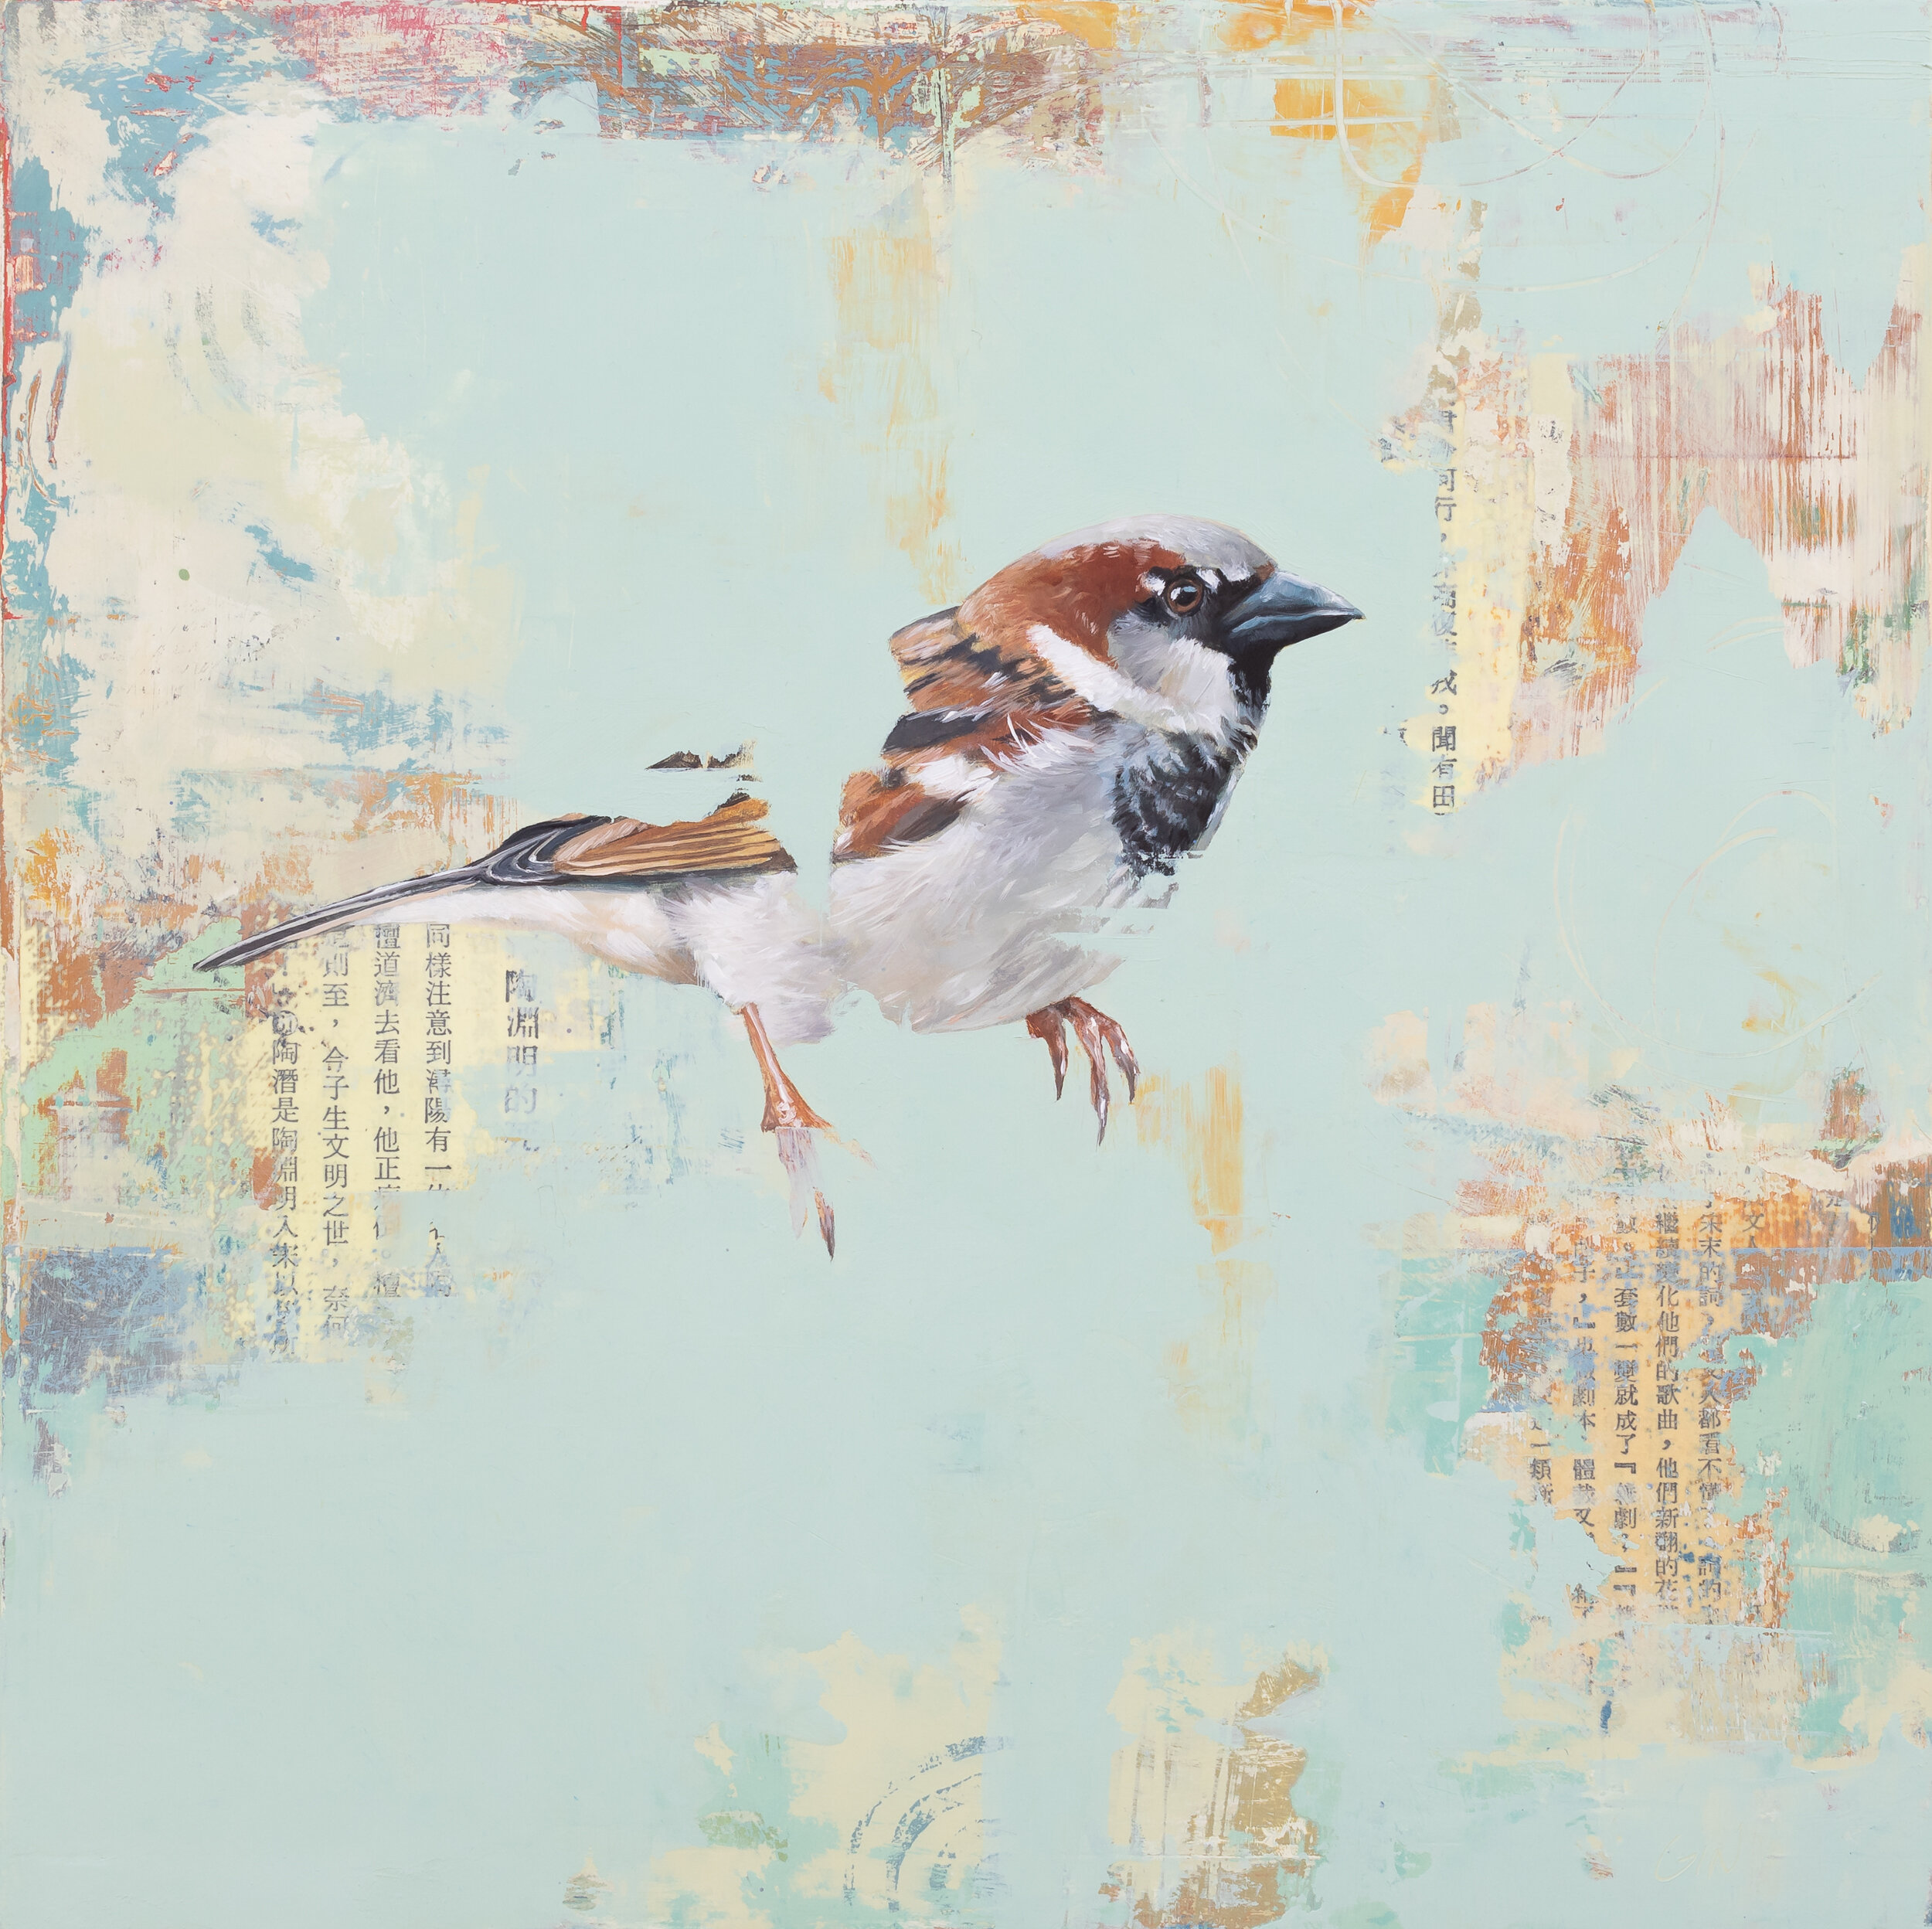     Sparrow Interlude  2021 oil and collage on panel 10 x 10 inches   Sold 